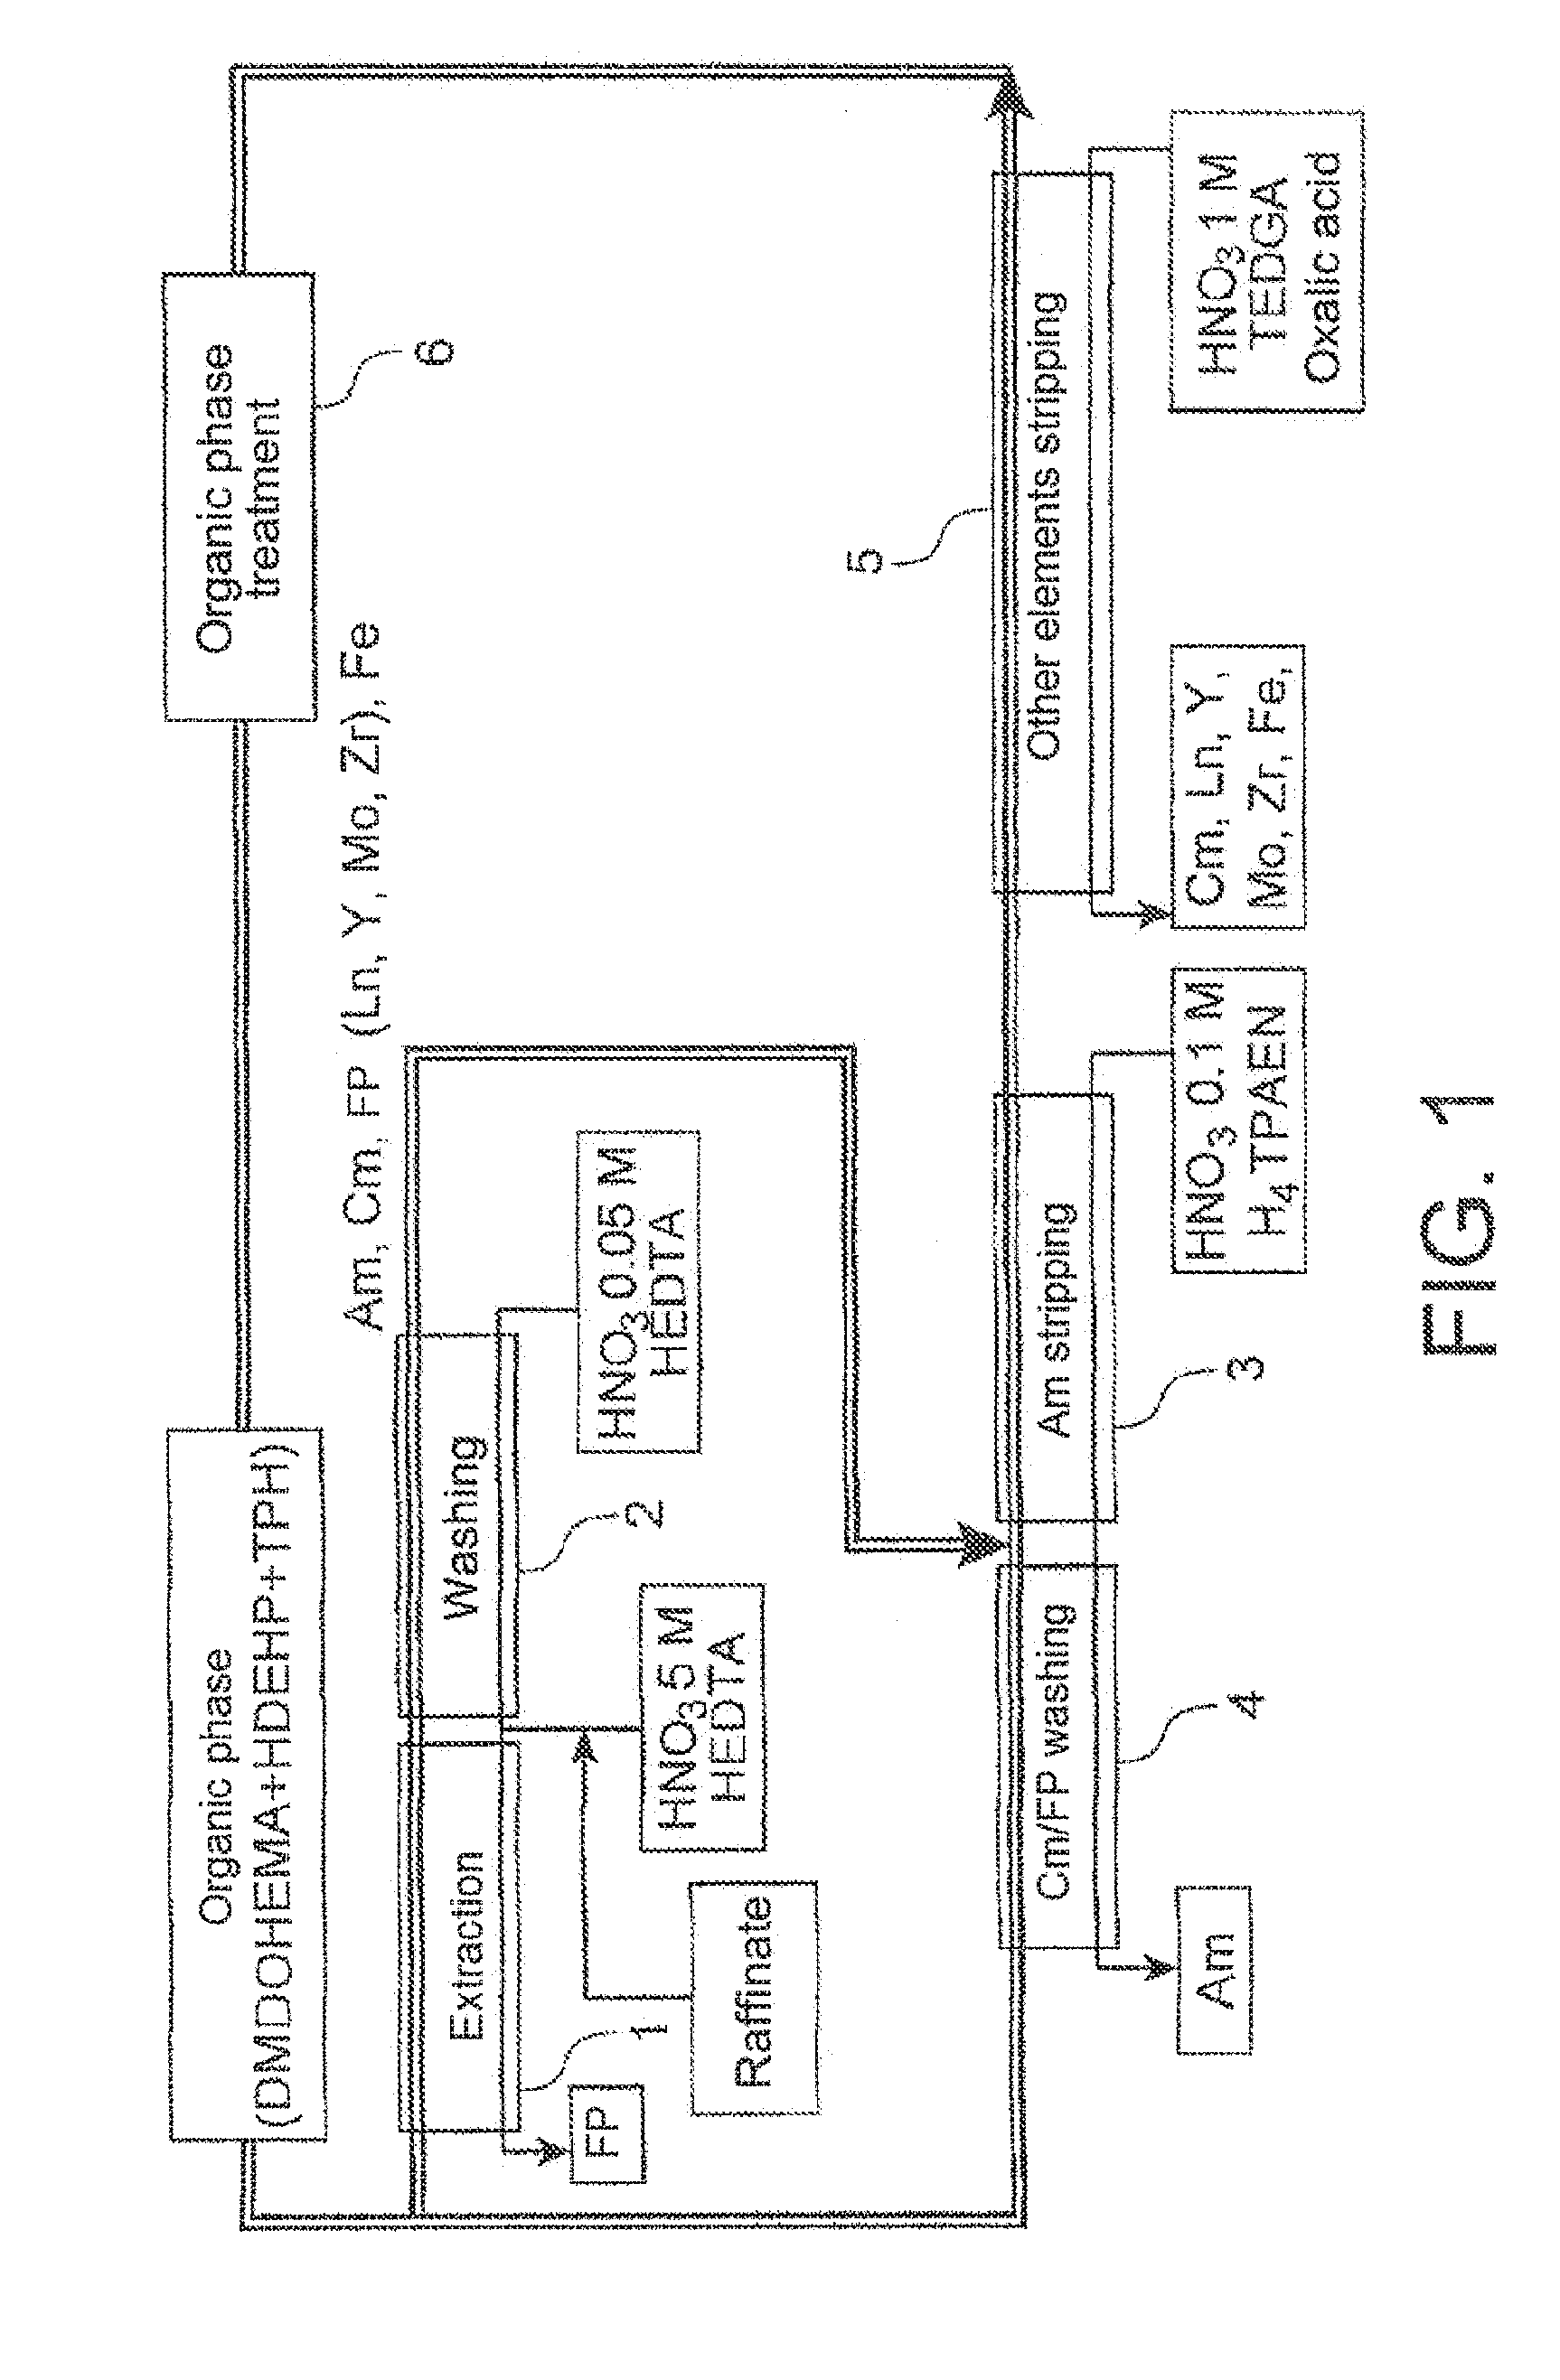 Process for separating americum from other metallic elements present in an acidic aqueous or organic phase and applications thereof